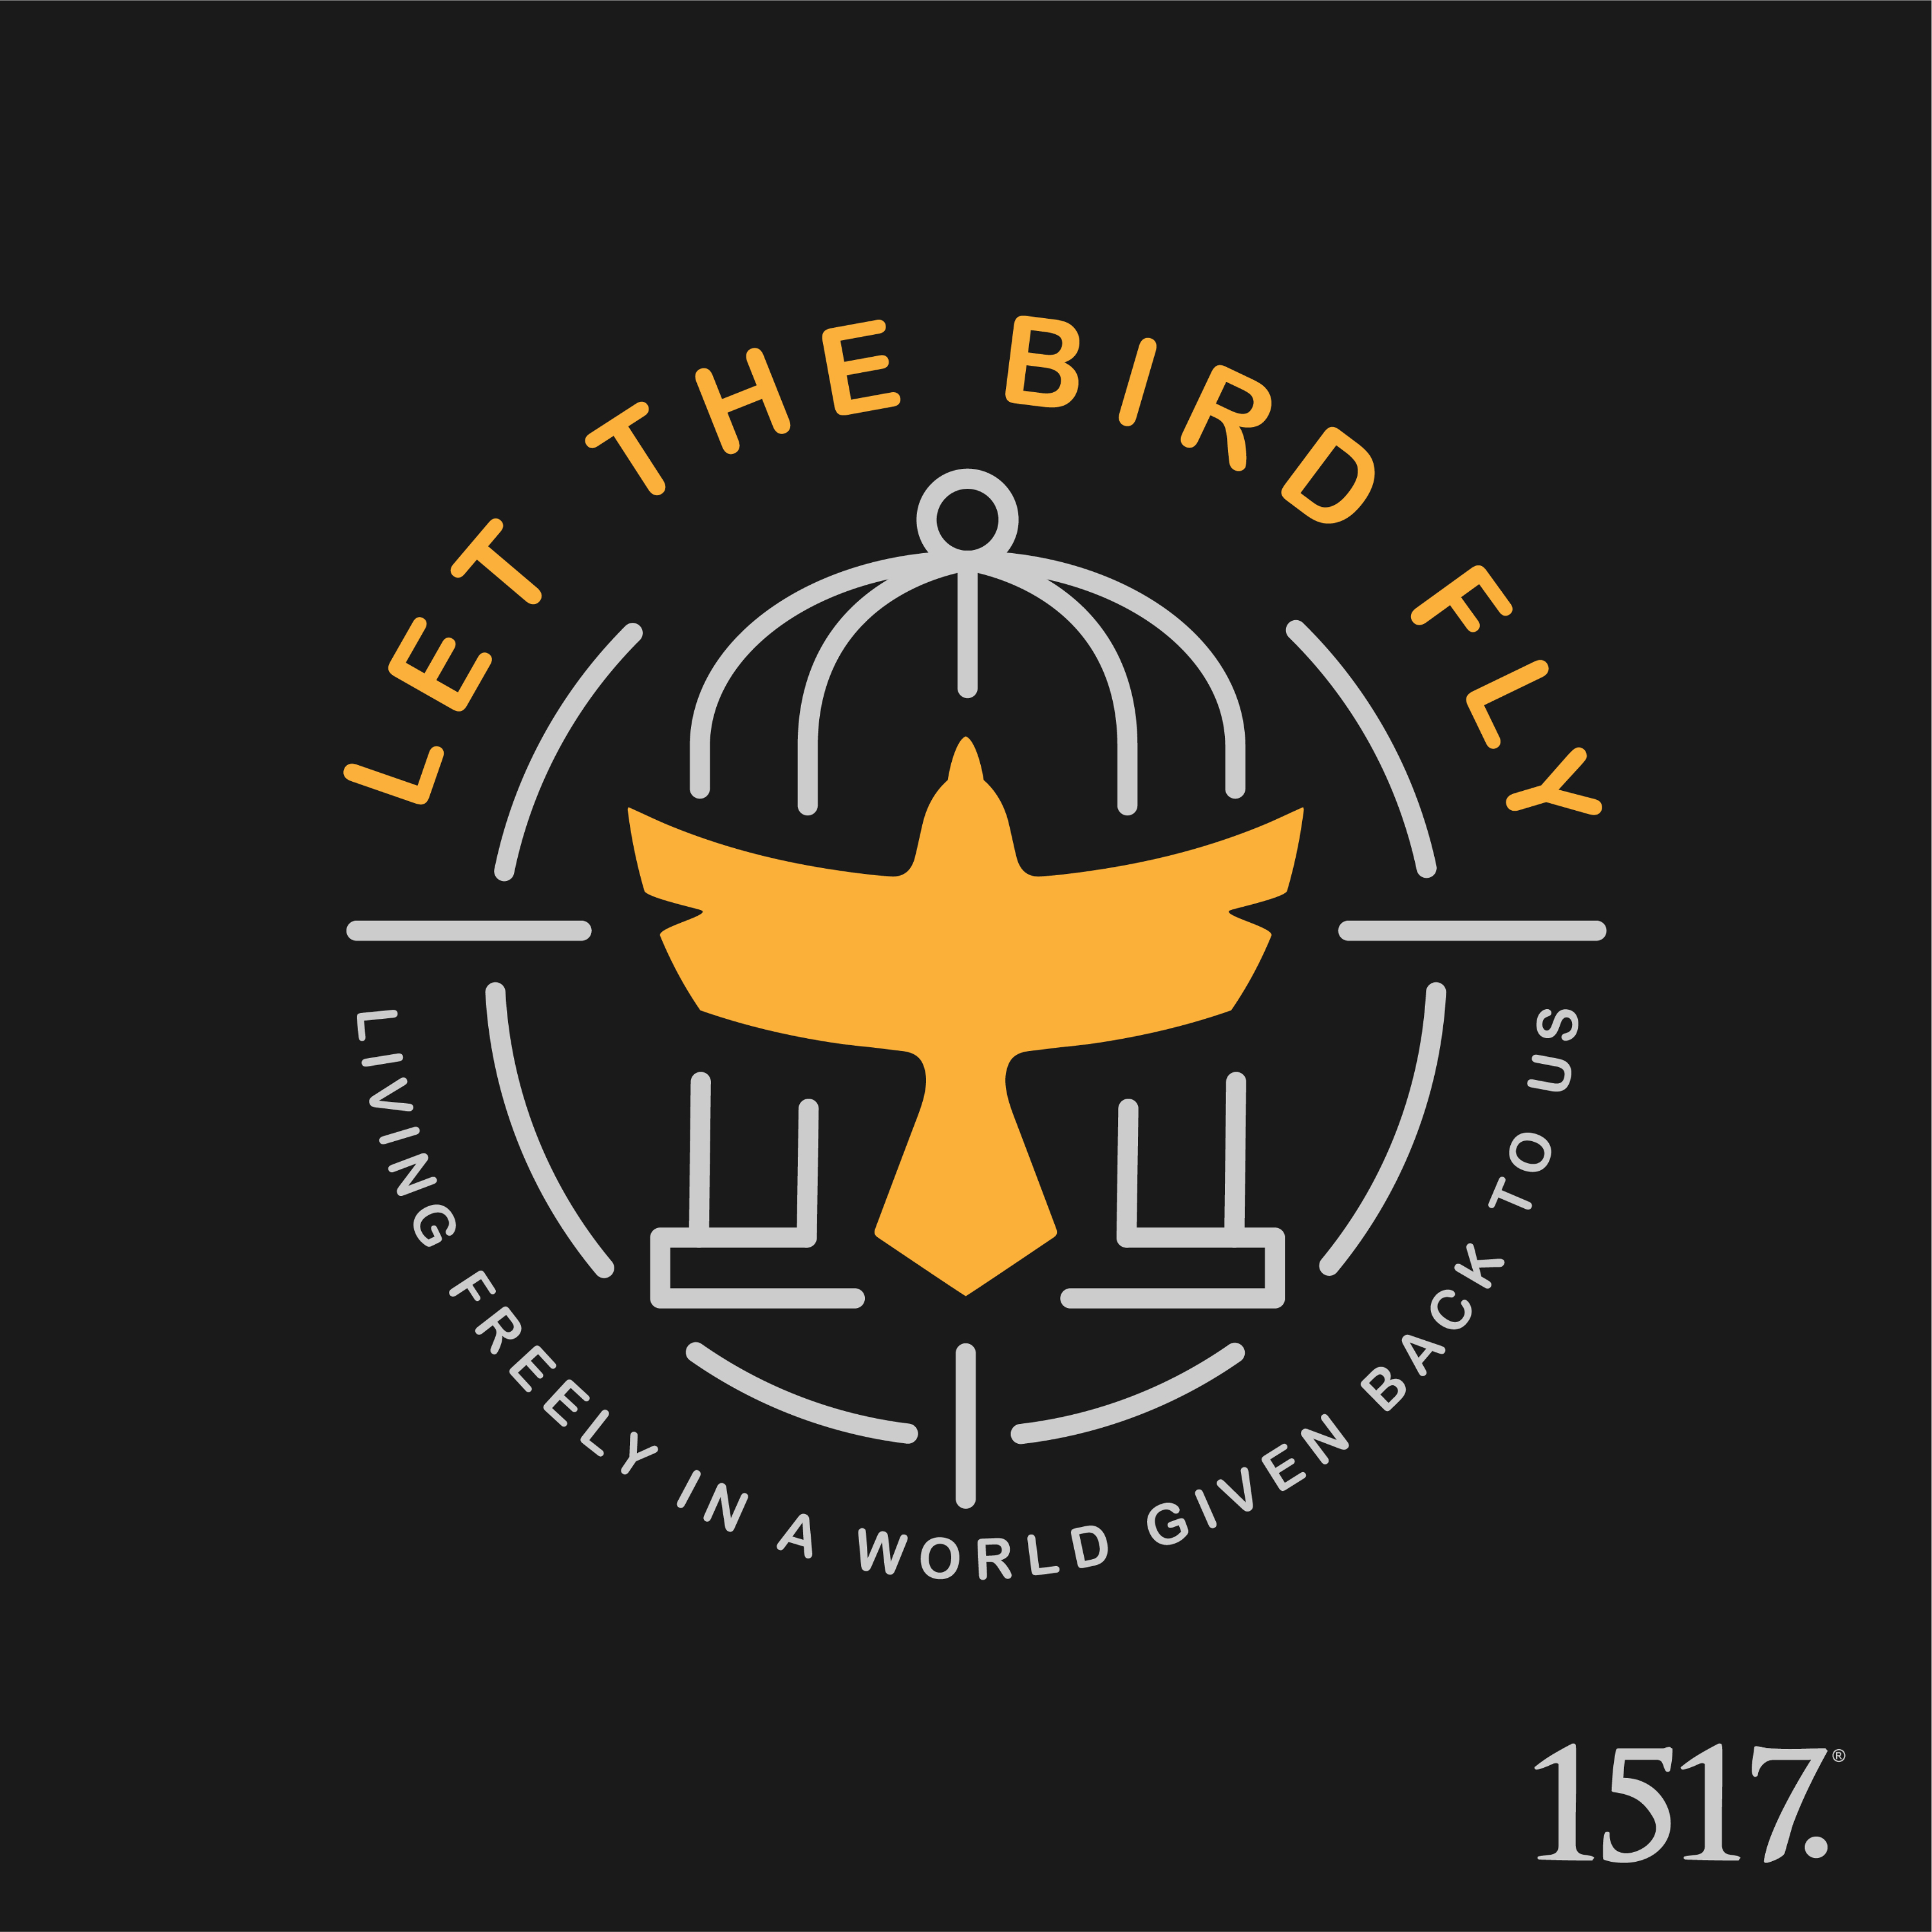 Subscribe to the Podcast – Let The Bird Fly!